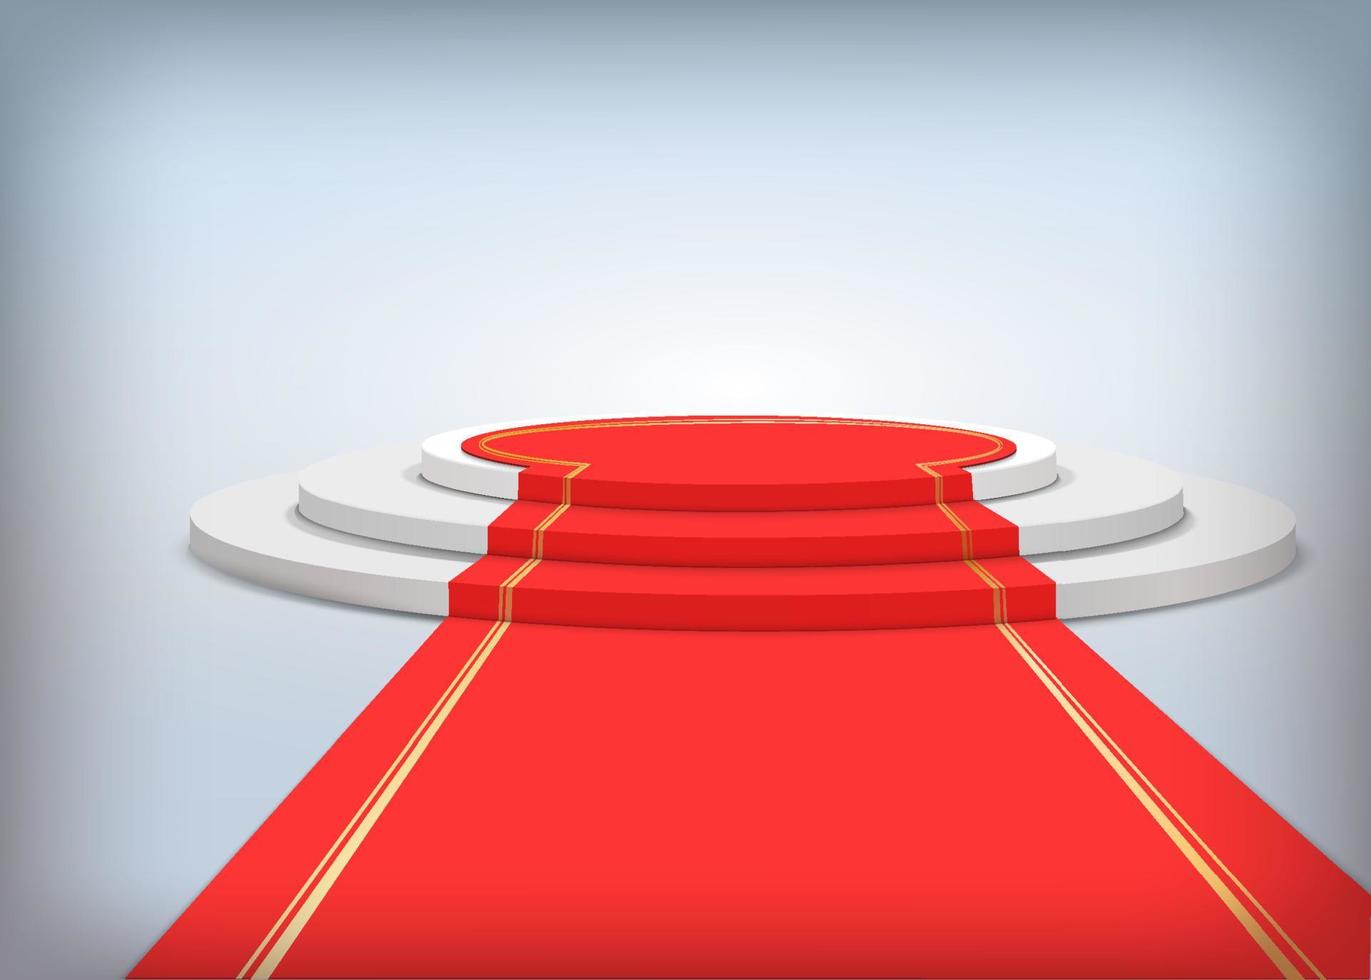 RRound podium with red carpet. Realistic vector illustration.